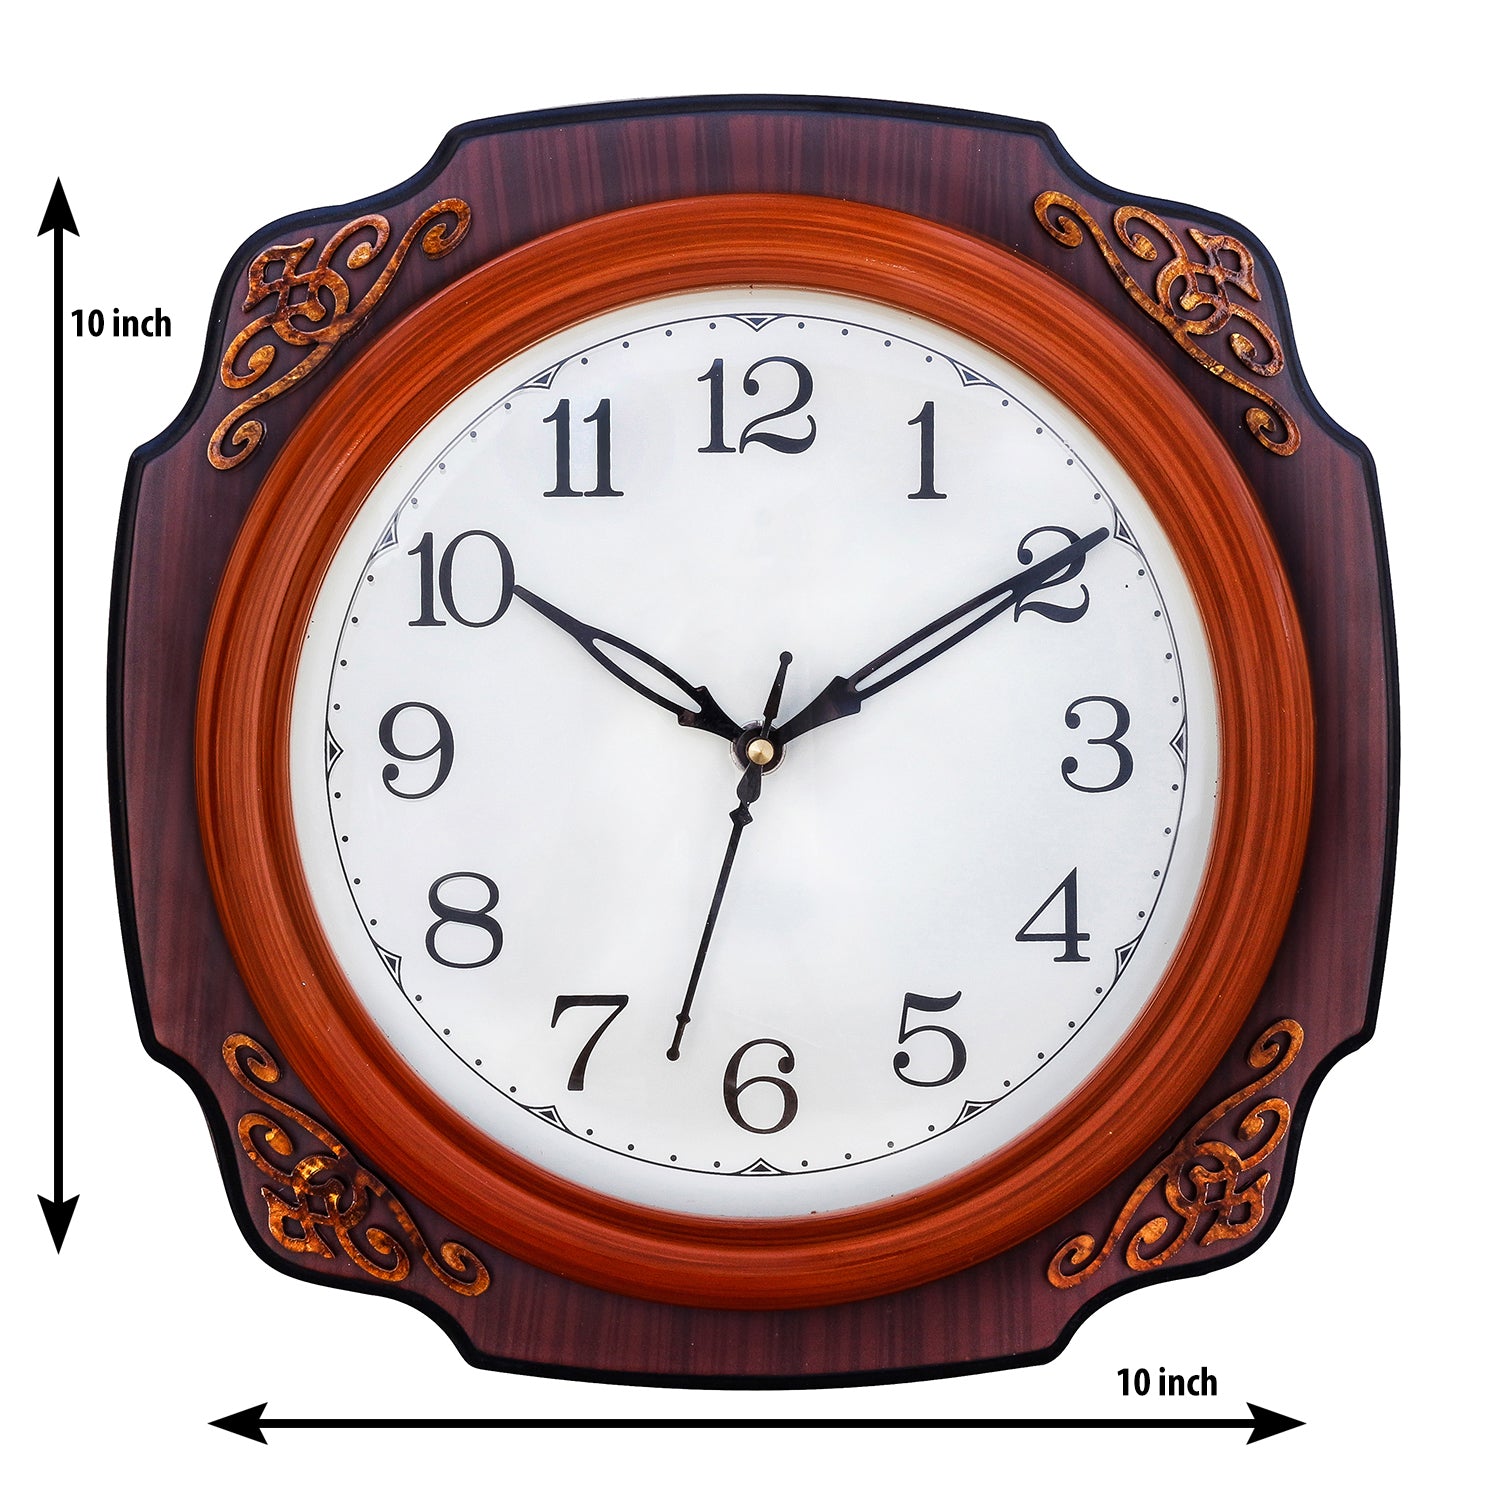 Cola Brown square wooden analog wall clock(25.4 cm x 25.4 cm) 2